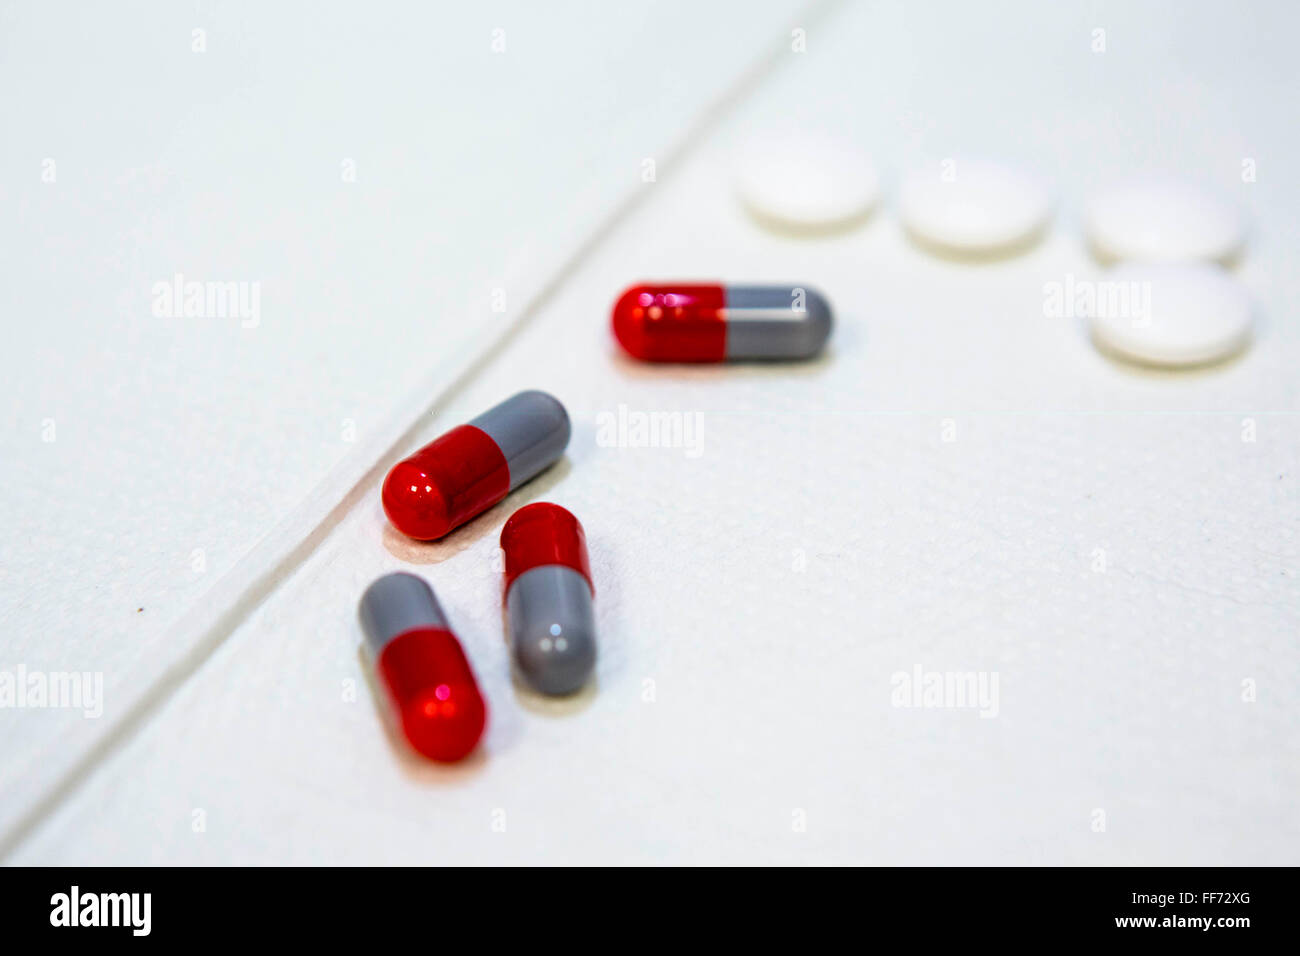 Medication tablets for tuberculosis in a TB clinic in London, England, UK. The red and grey tablets are Rifampicin and white tablets are Pyrazinamide.  They have to be taken together to treat the bacterial infection and prevent drug resistance. Stock Photo